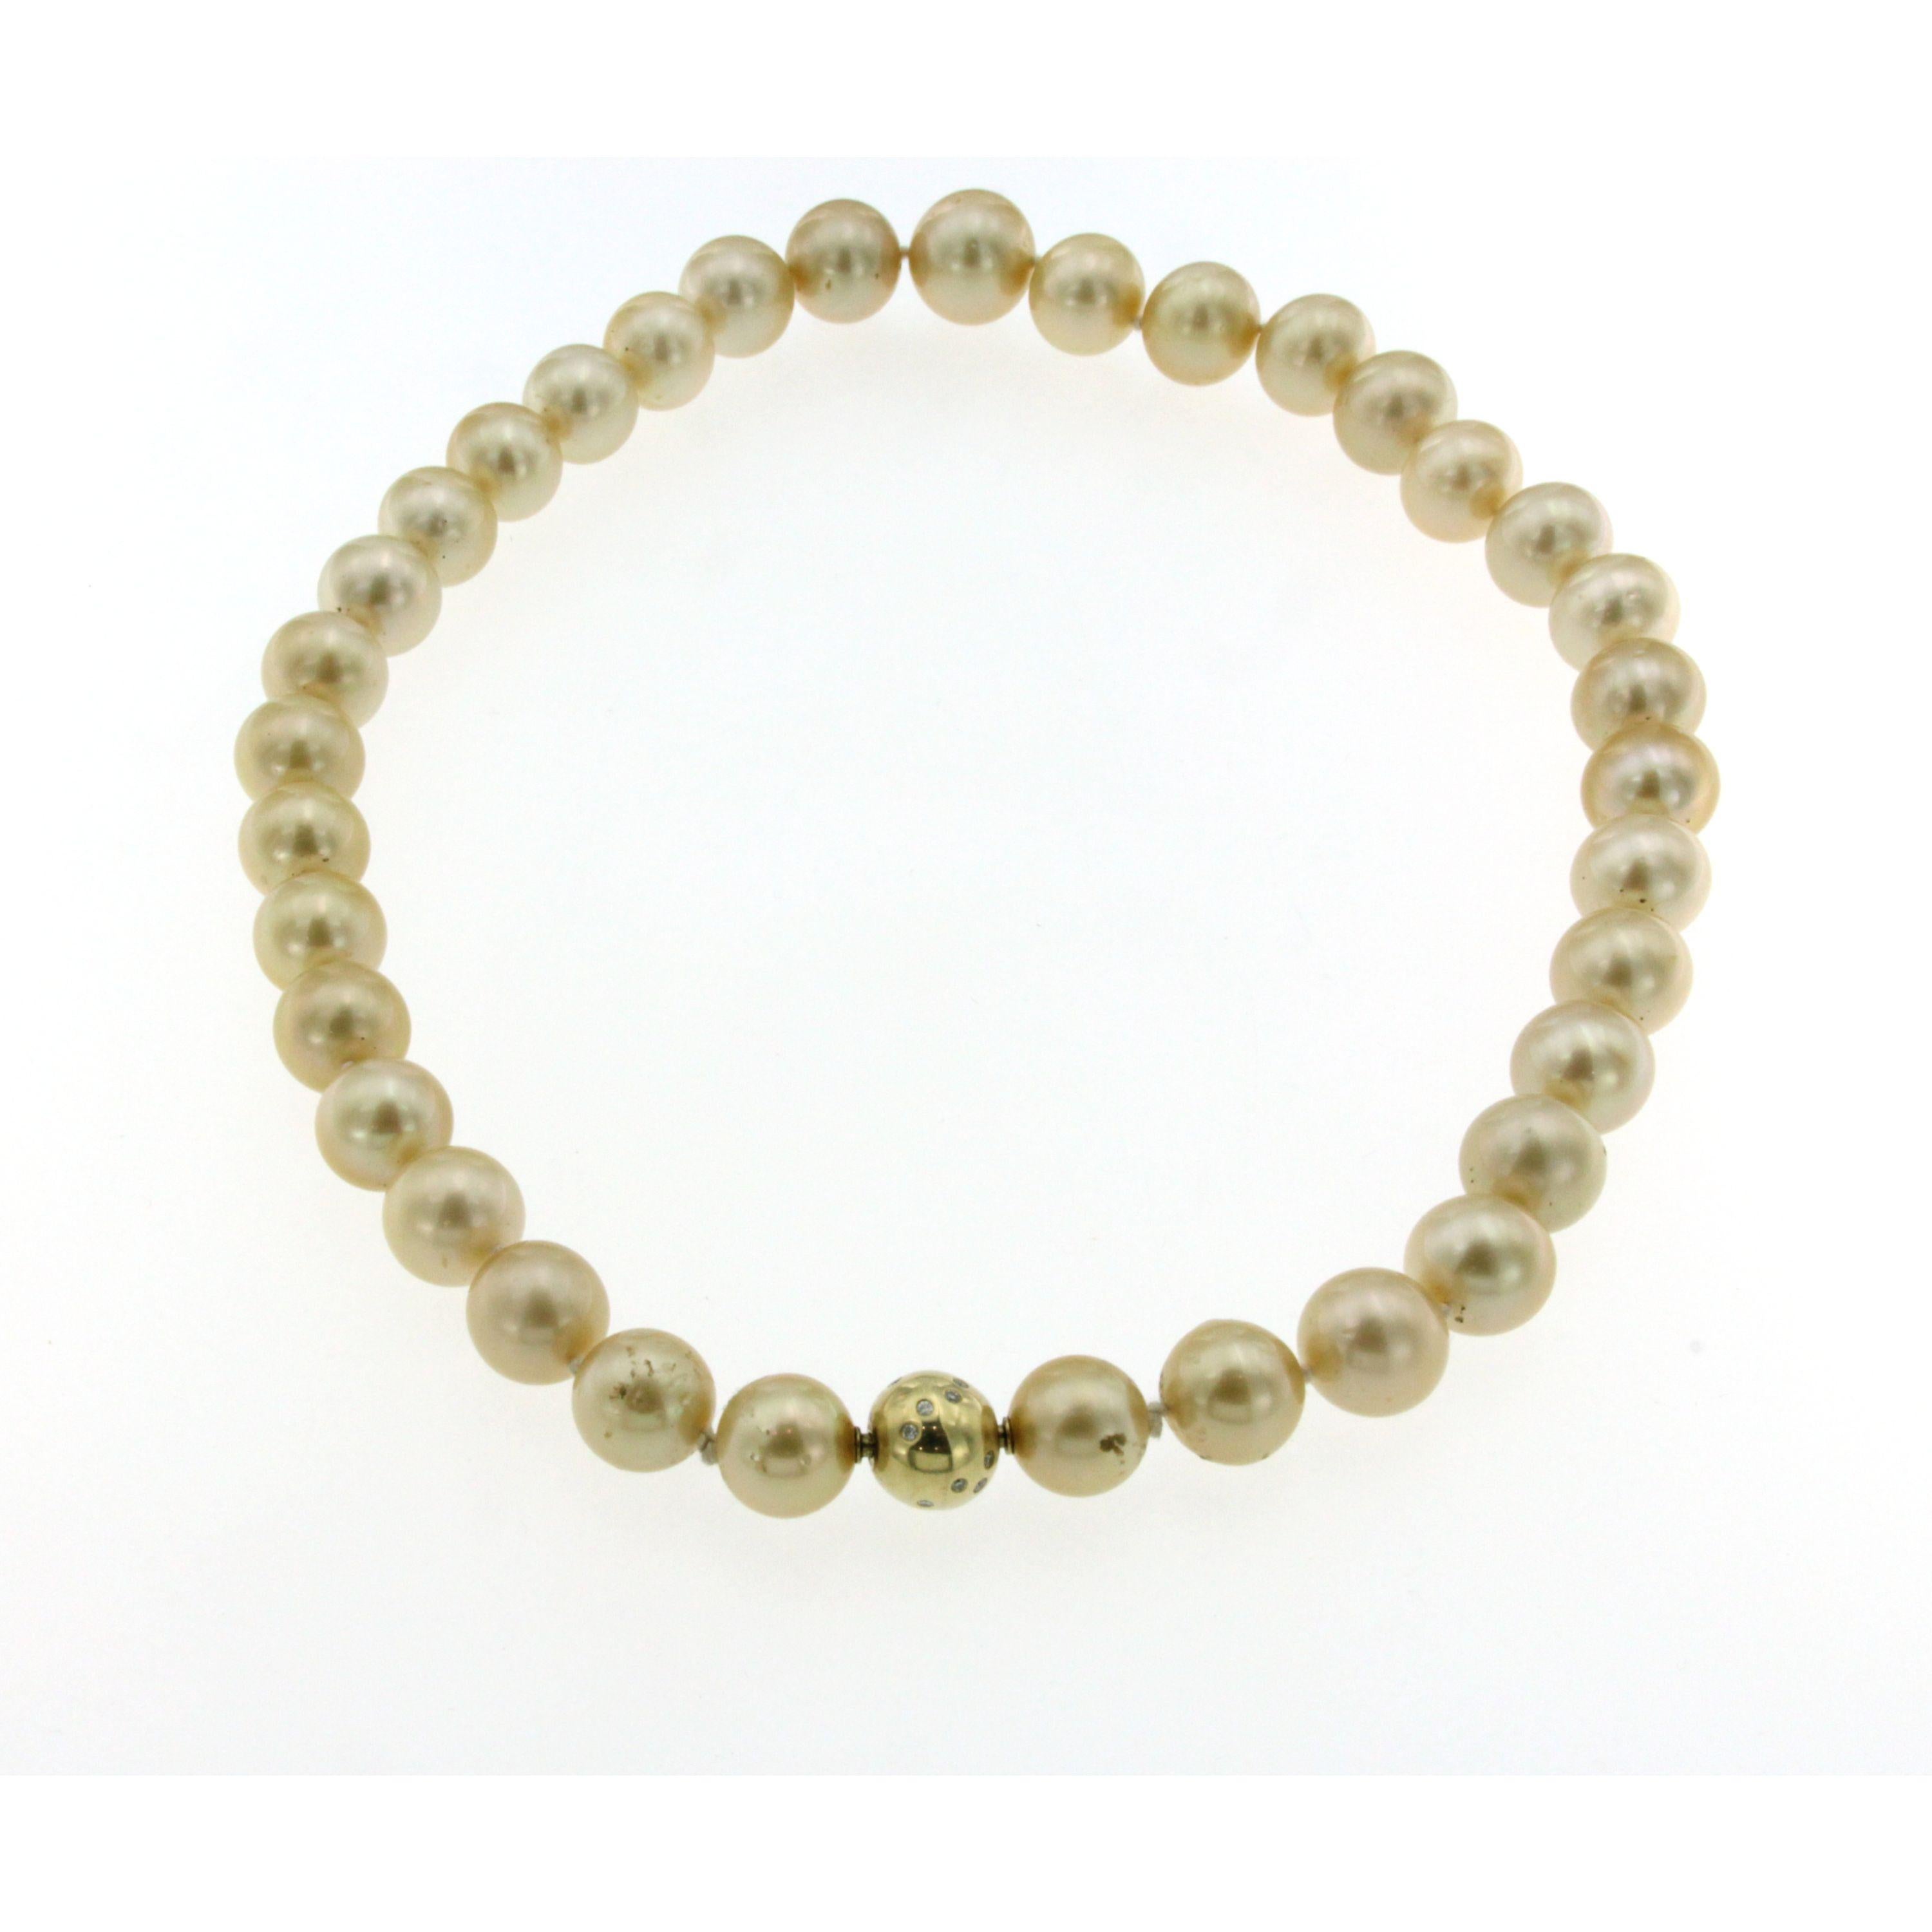 Beautiful large Golden South Sea pearl necklace, this strand includes 12-14 millimeter pearls strung on a knotted silk thread and fasten with a gorgeous 18k yellow gold diamond clasp. This strand is an heirloom quality piece that will be enjoyed for